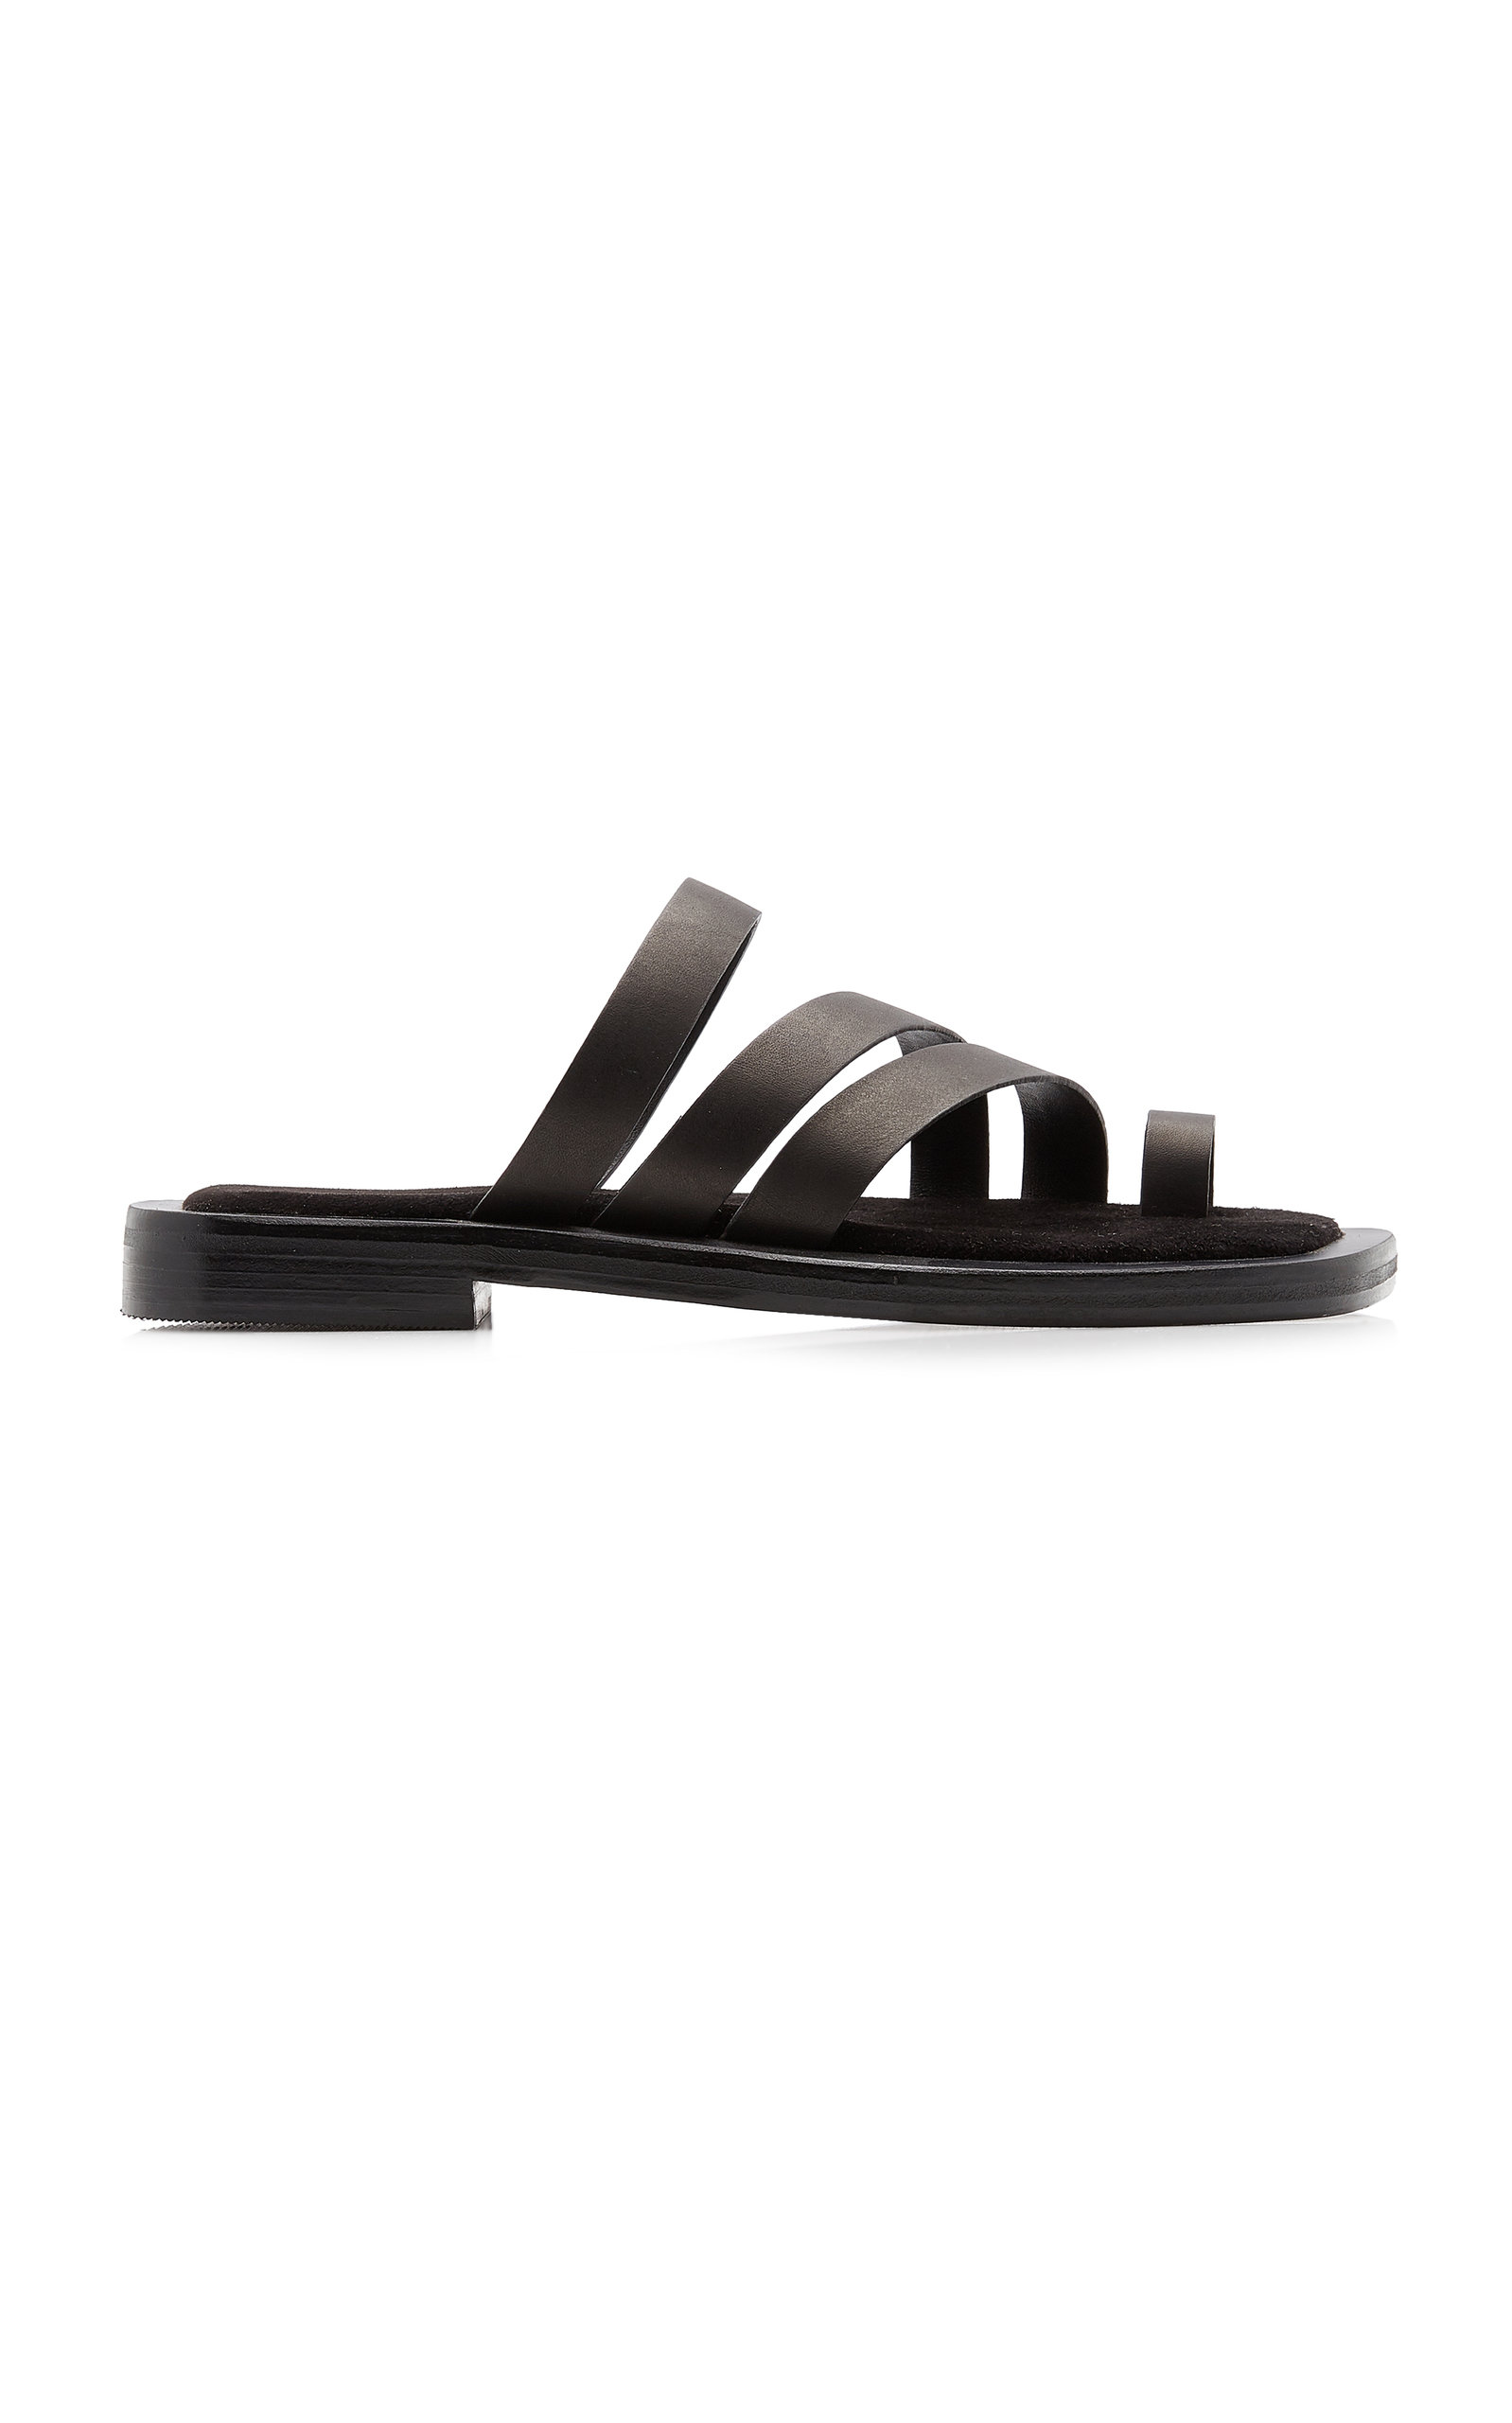 A.EMERY WOMEN'S LIAM LEATHER SANDALS